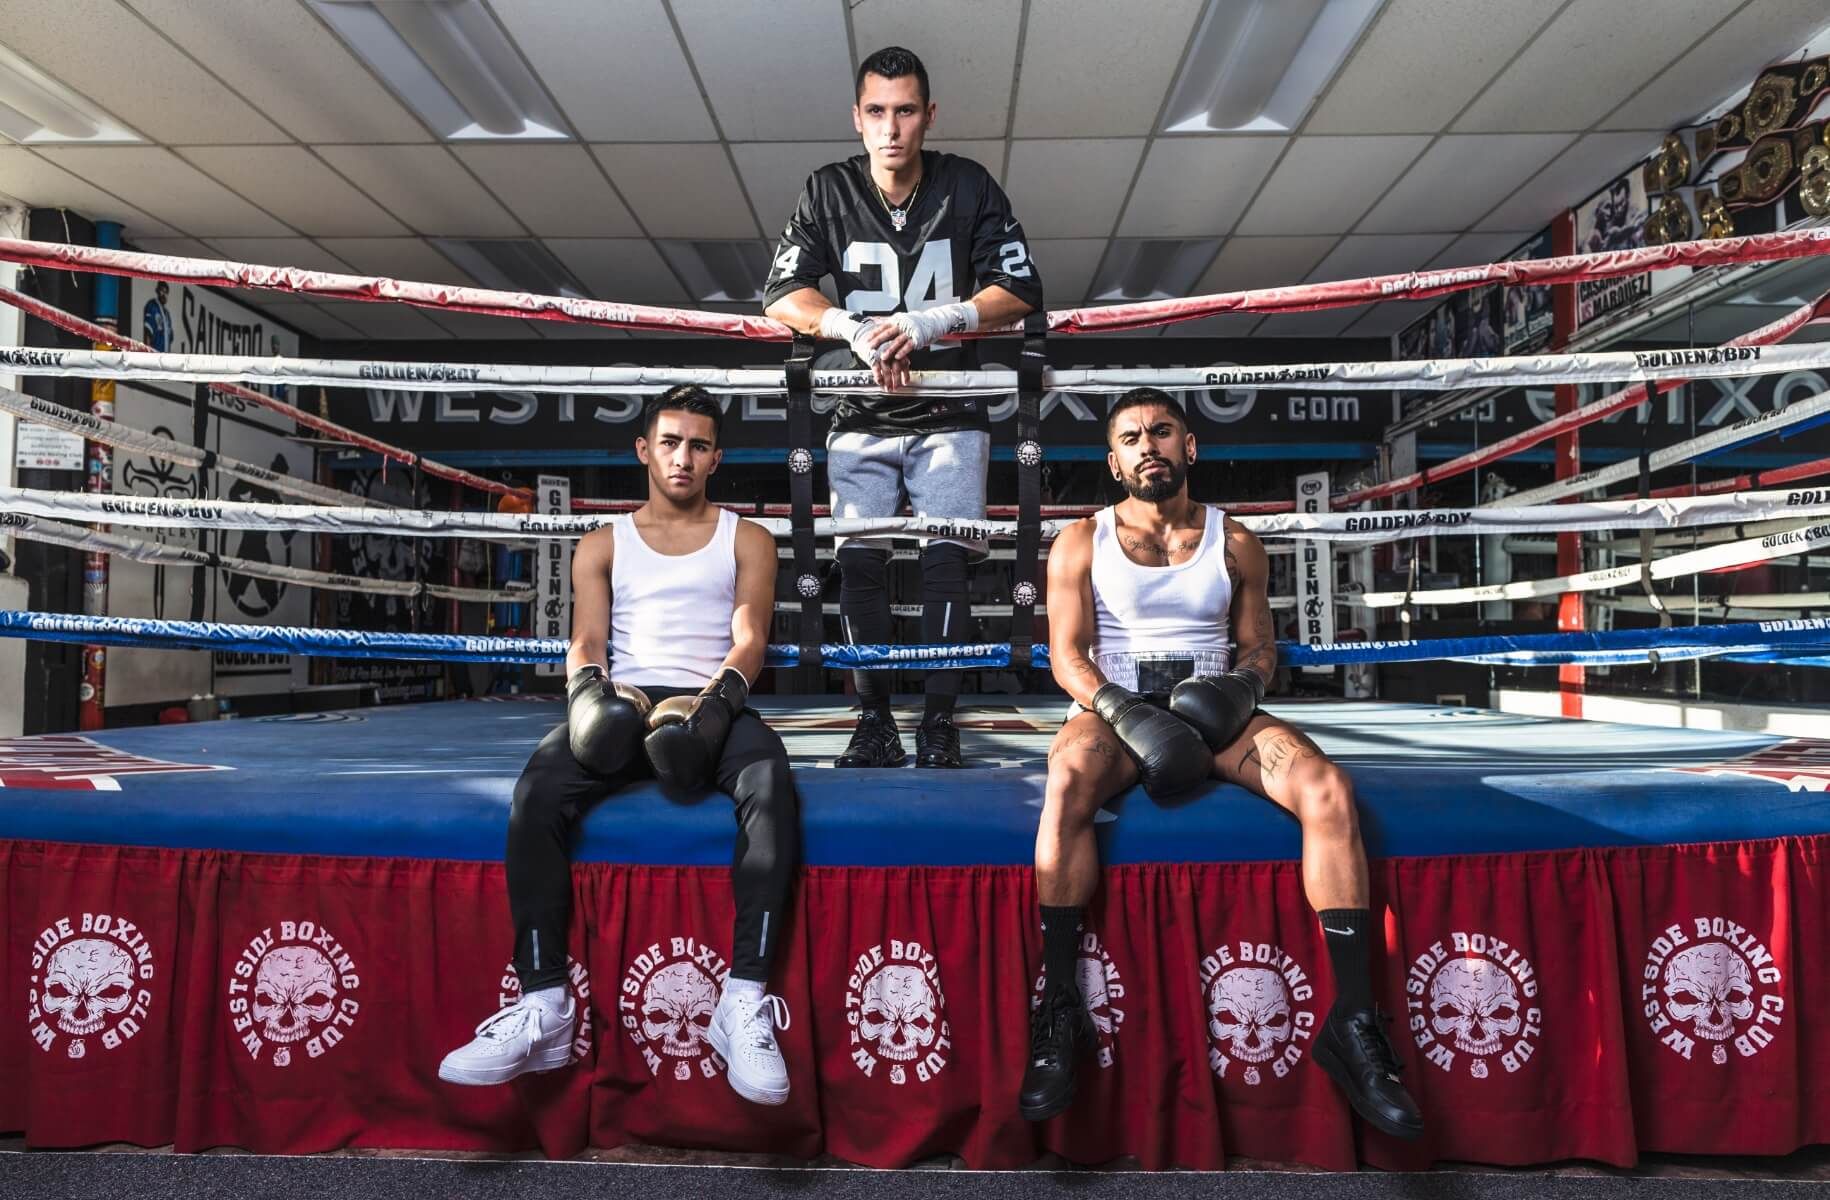 Three men resting against ropes in boxing gym, one has number 24 Raiders football jersey on